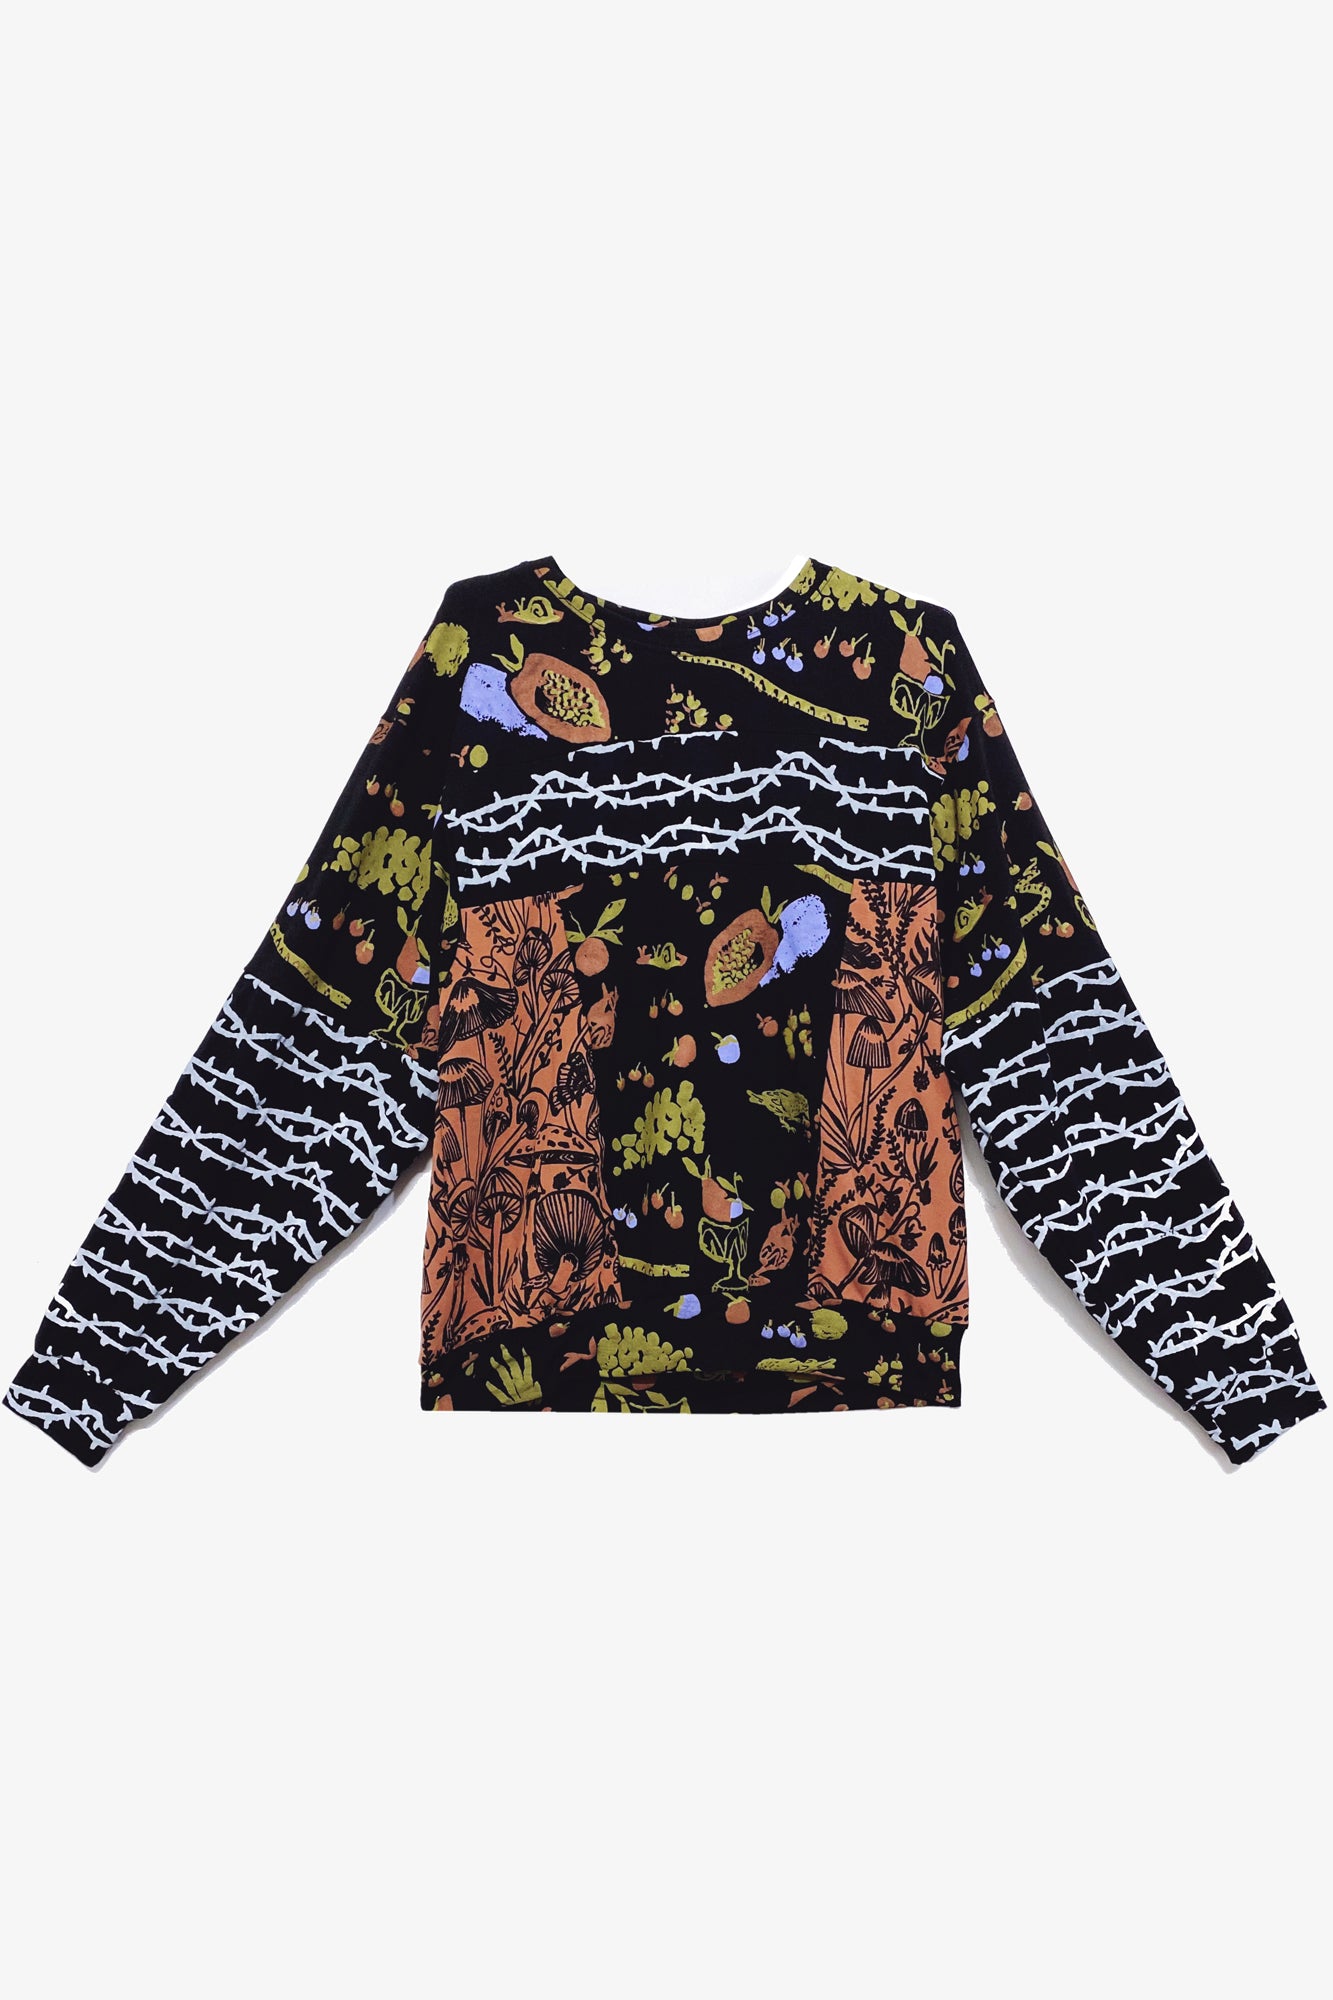 Unisex Patchwork Sweatshirt in Picnic, Mulberry Shroom, and Thorn in Size 1 (Fits Small-Medium)